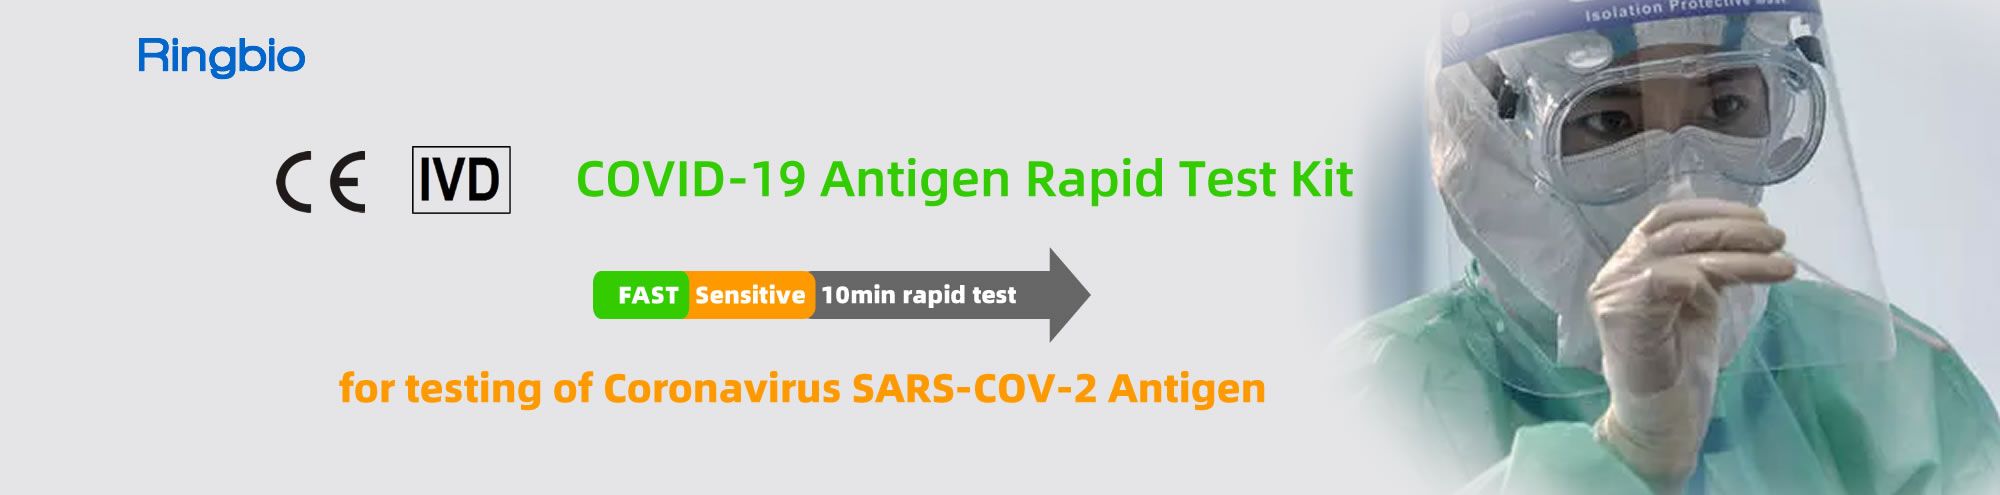 Let's fight against COVID-19 together with our COVID-19 antigen rapid test kit